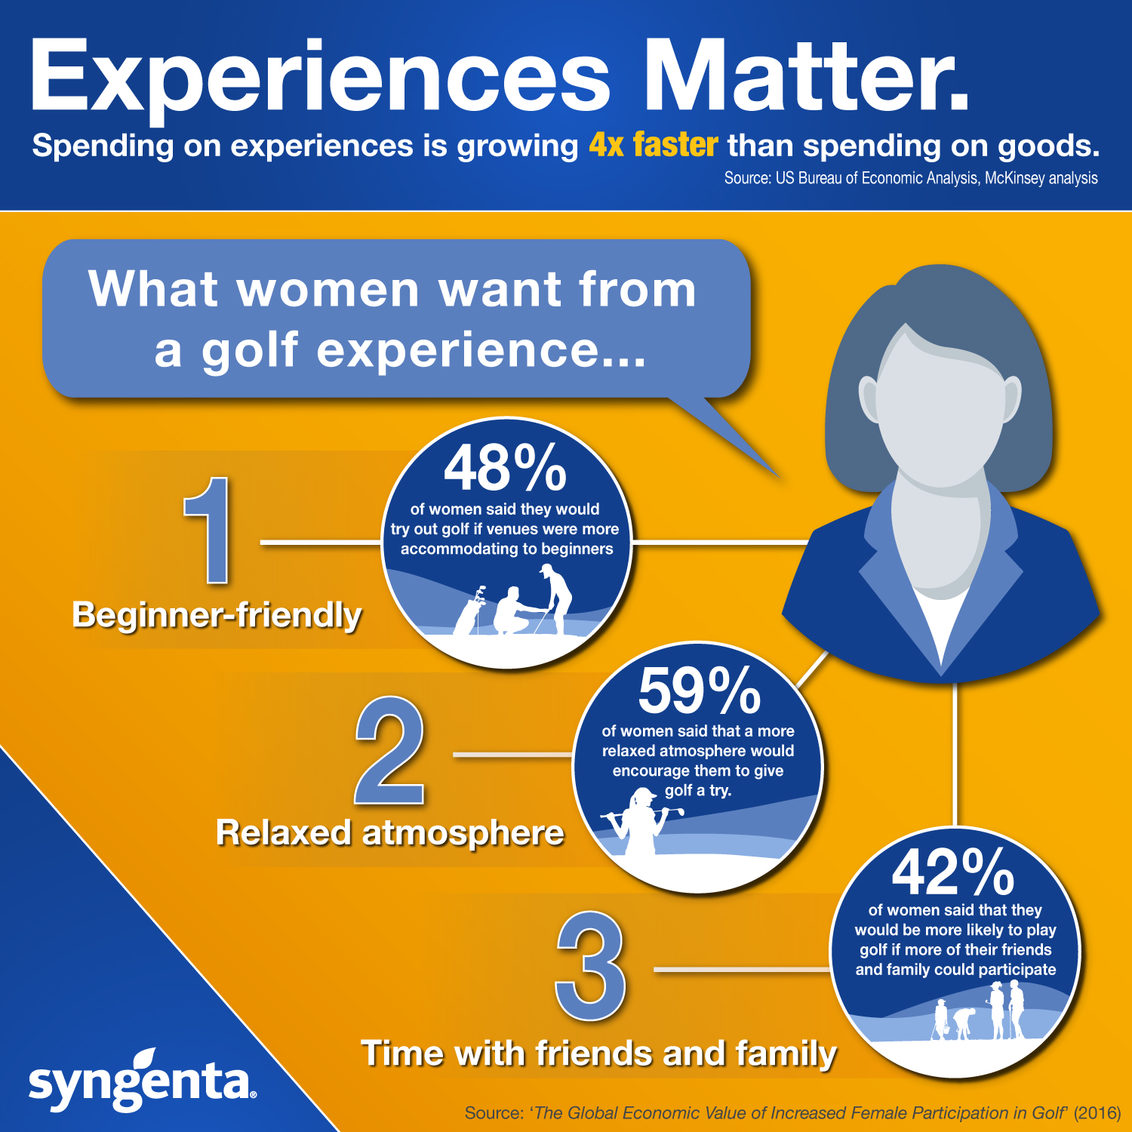 Delivering golf experiences to women